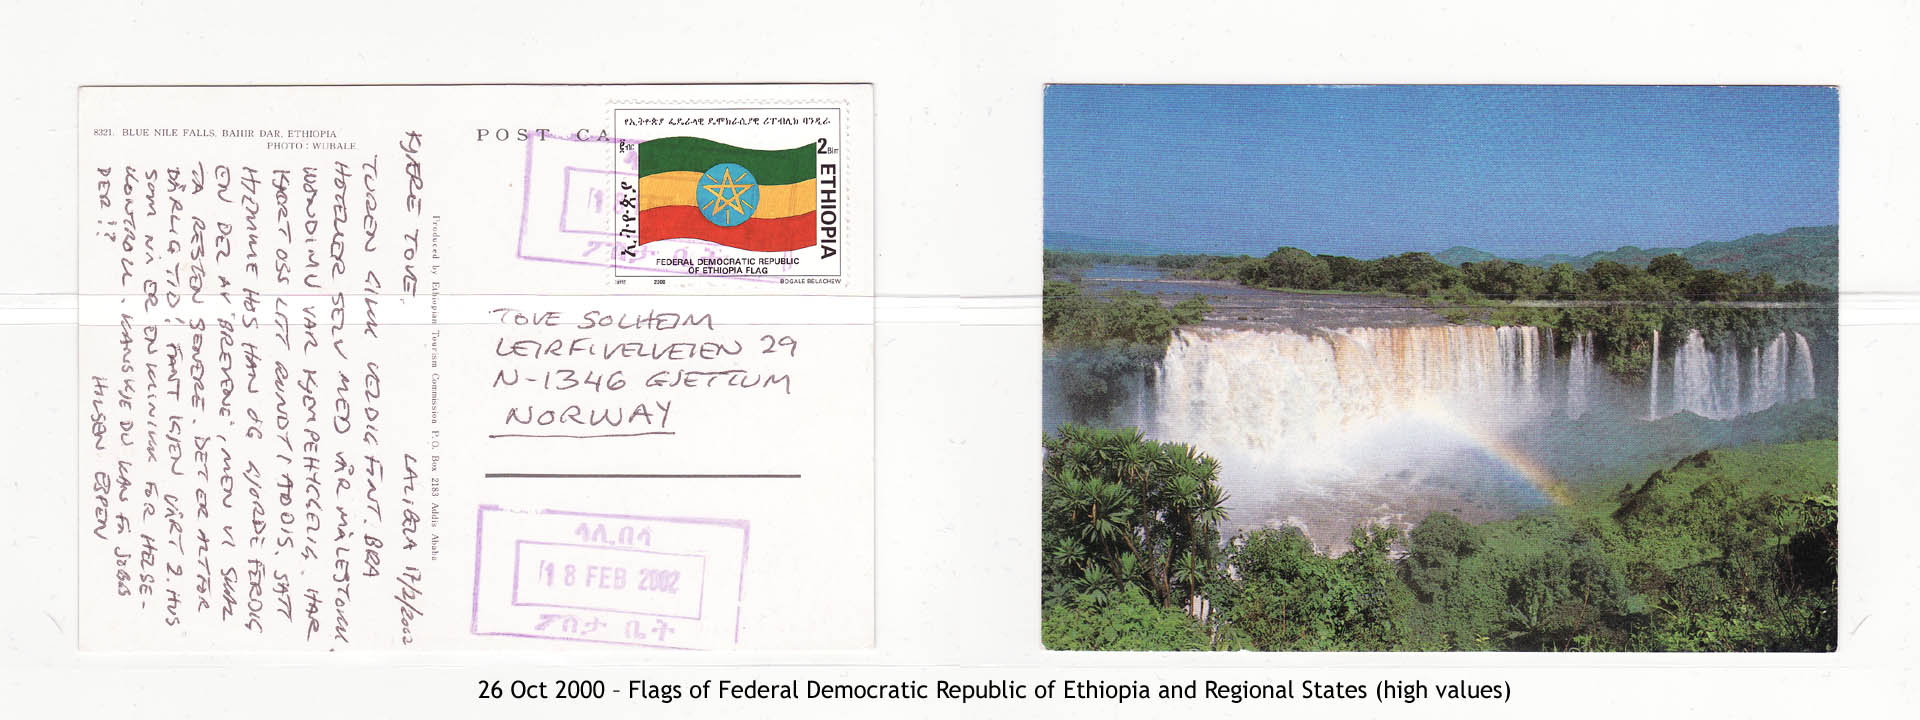 20001026 – Flags of Federal Democratic Republic of Ethiopia and Regional States (high values)